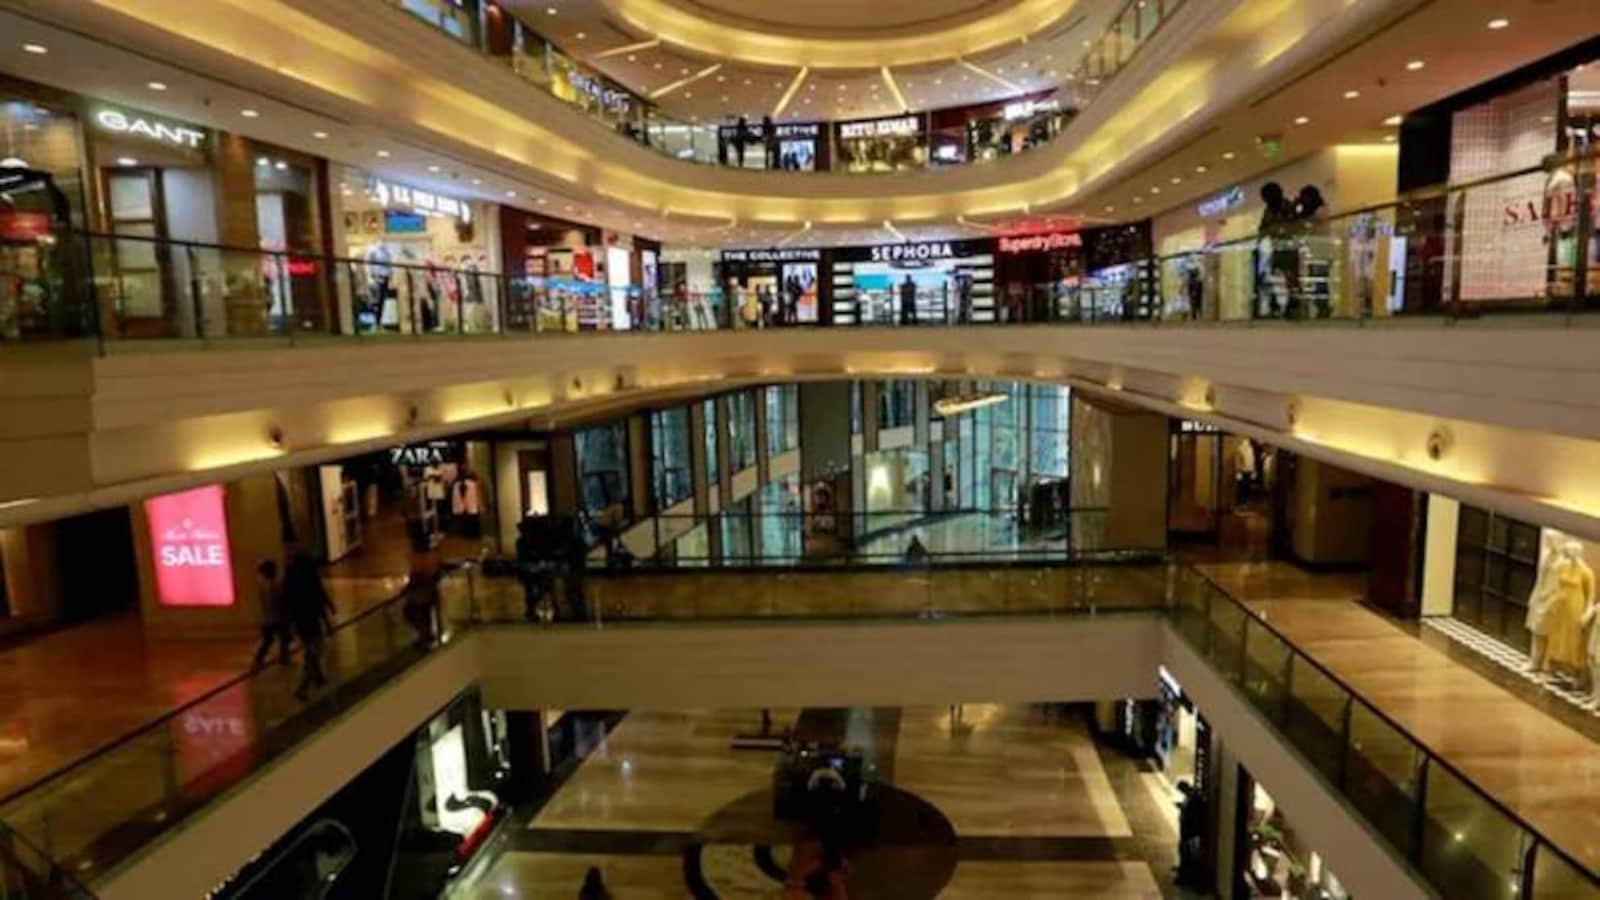 LVMH and Gucci Unveil Plans to Flourish in India via Reliance s Luxury Mall